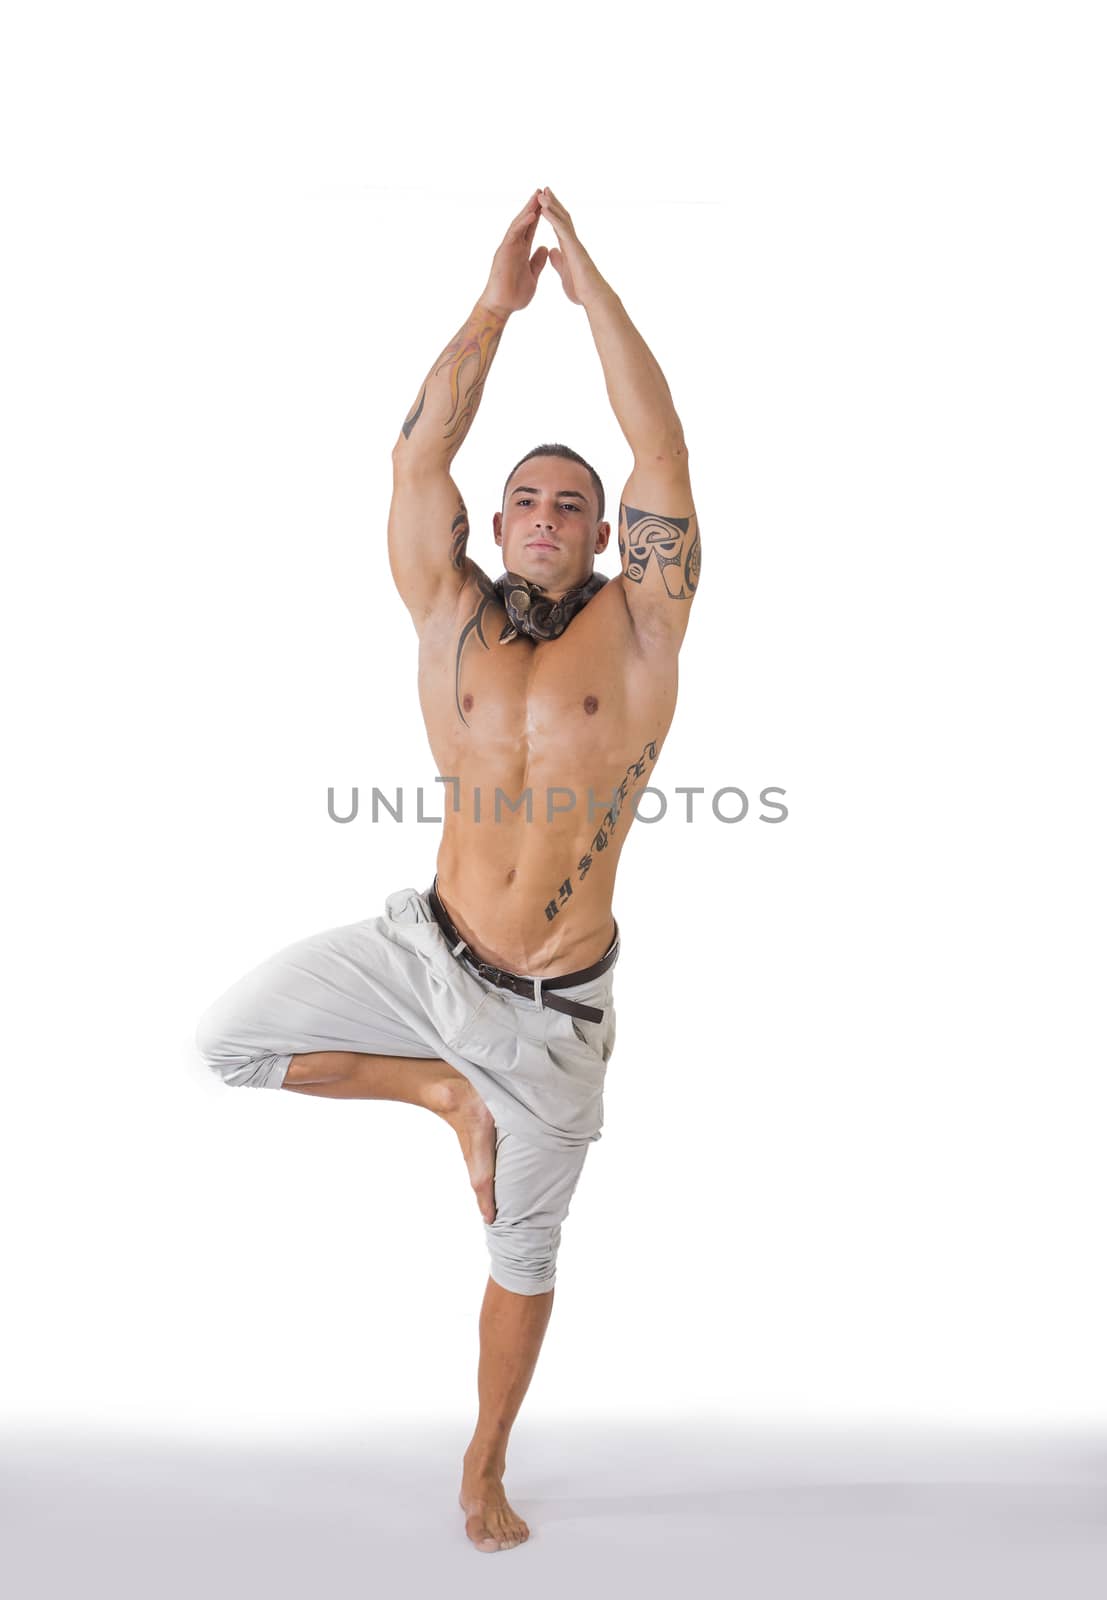 Muscular Shirtless Male Acrobatic Dancer or Yoga Practitioner Balancing on one Leg and Foot, in Studio Isolated on White Background